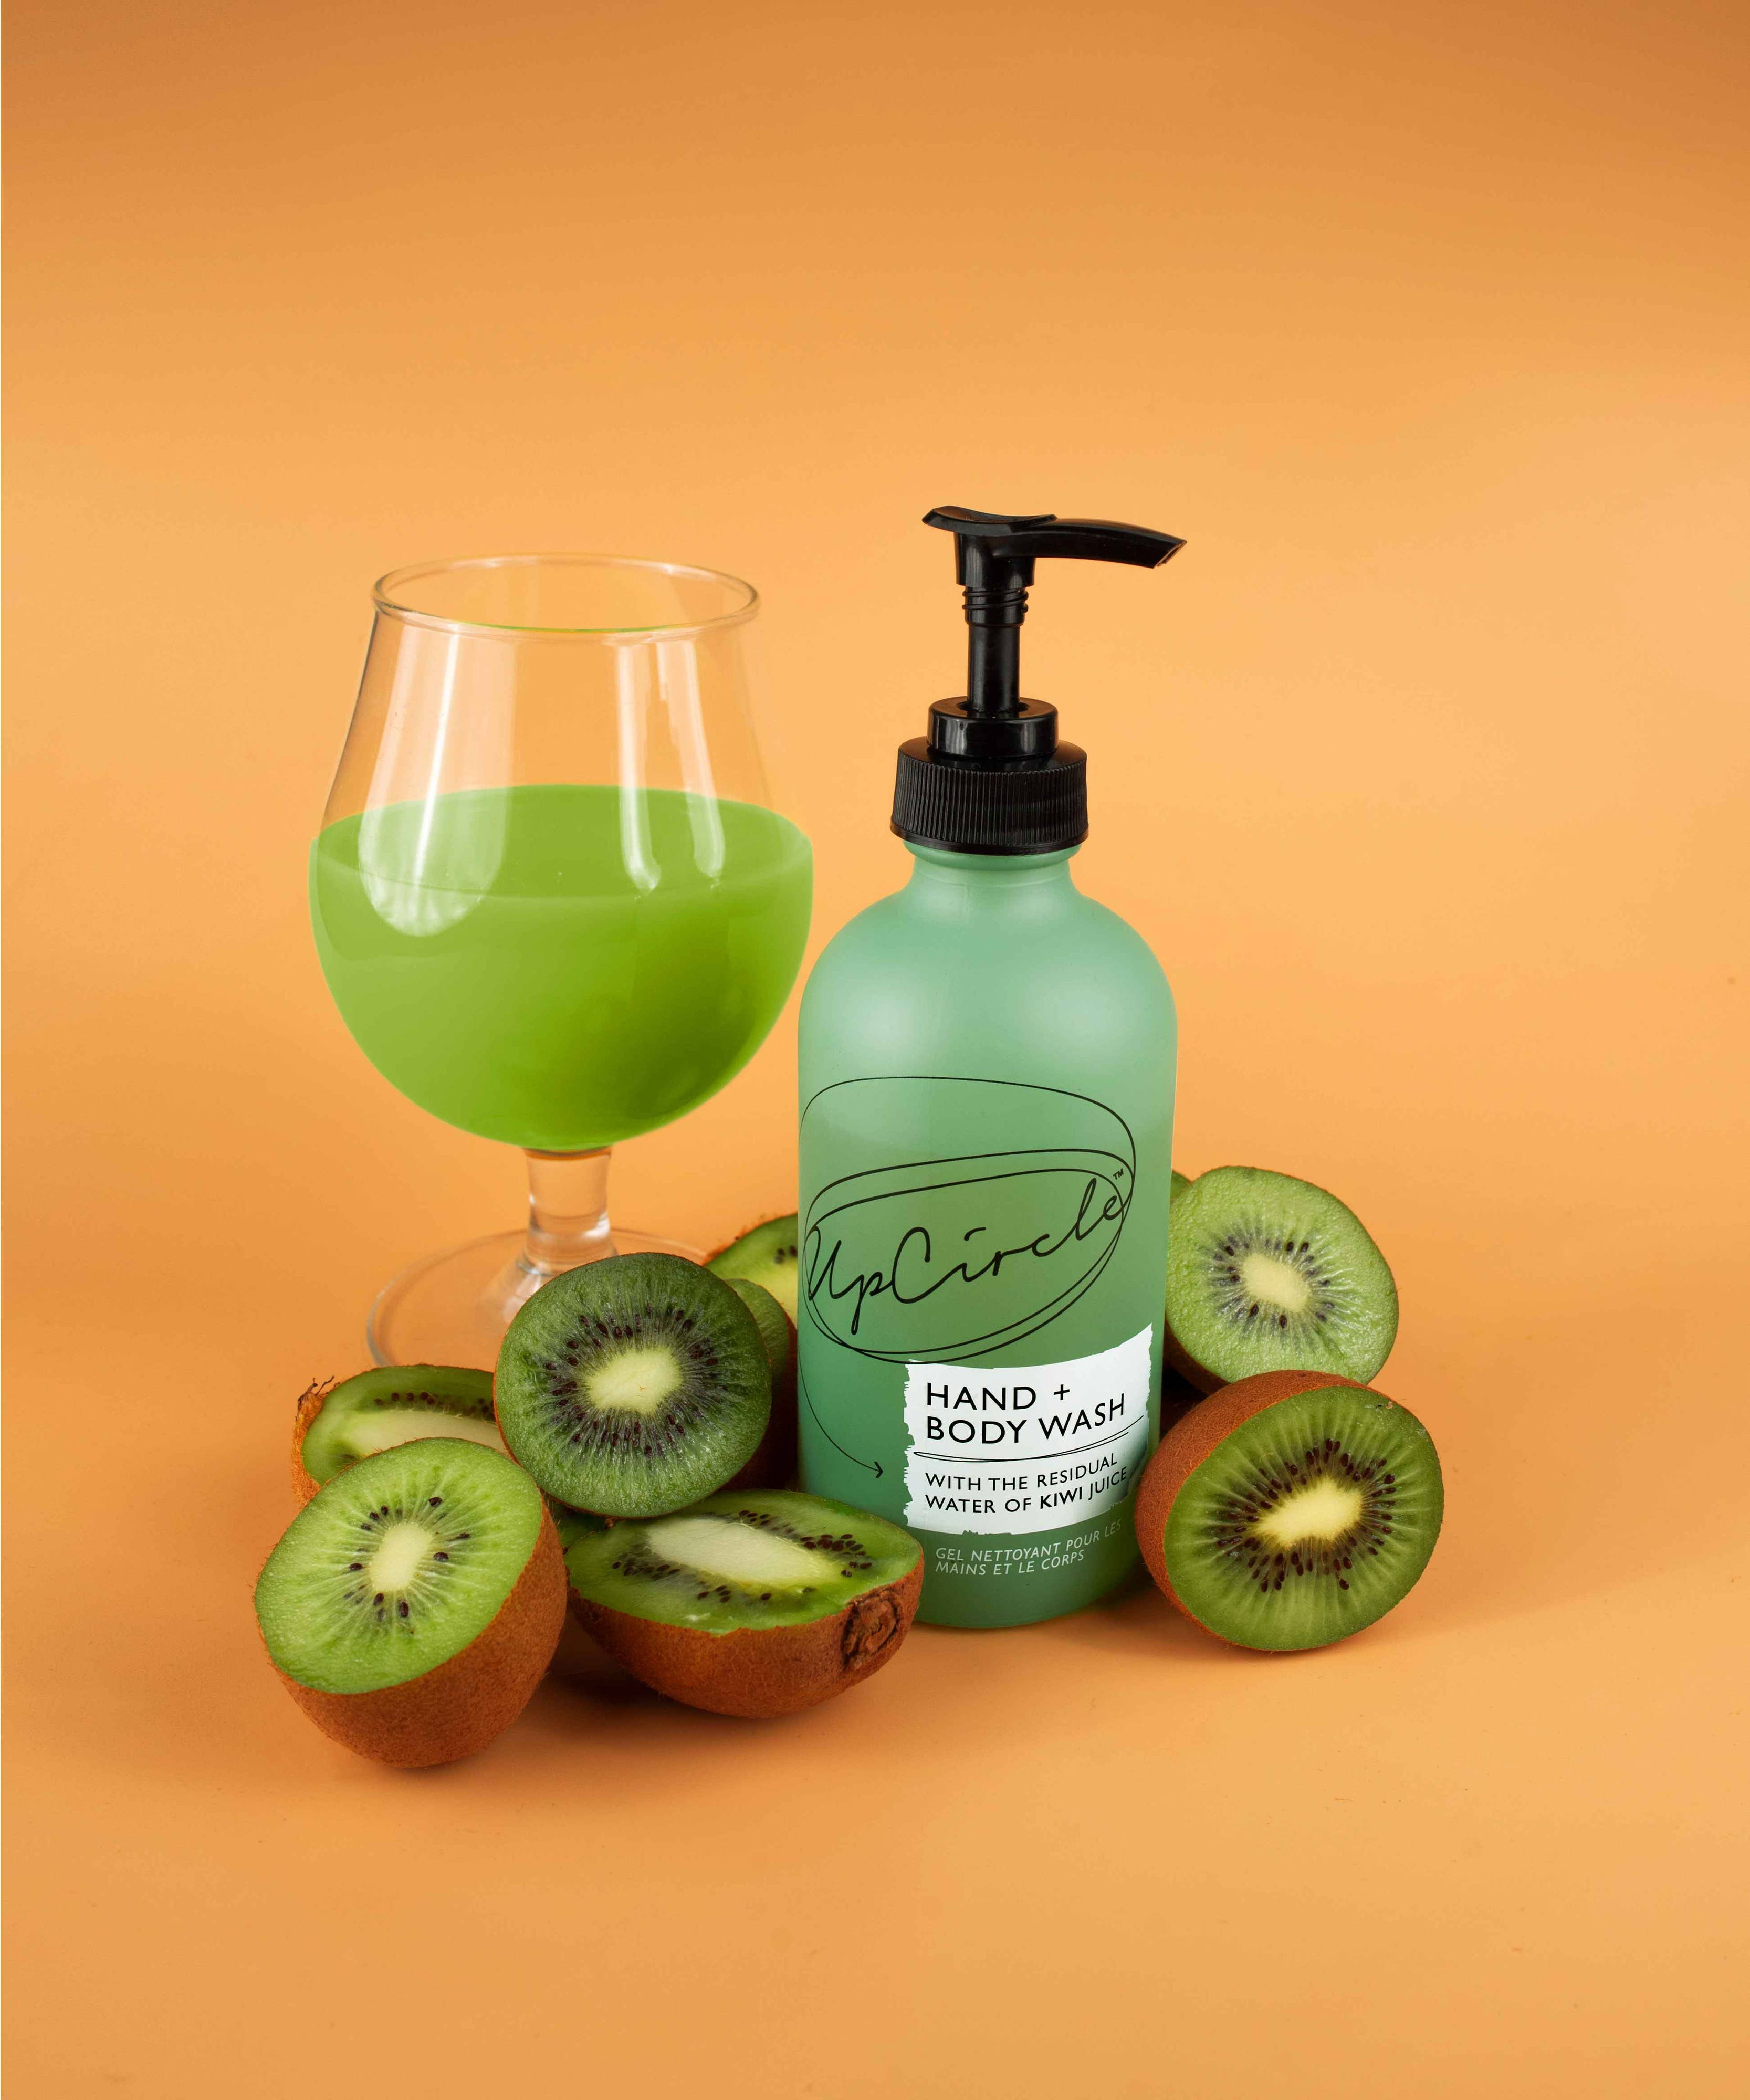 Load image into Gallery viewer, UpCircle Hand + Body Wash with Lemongrass + Kiwi
